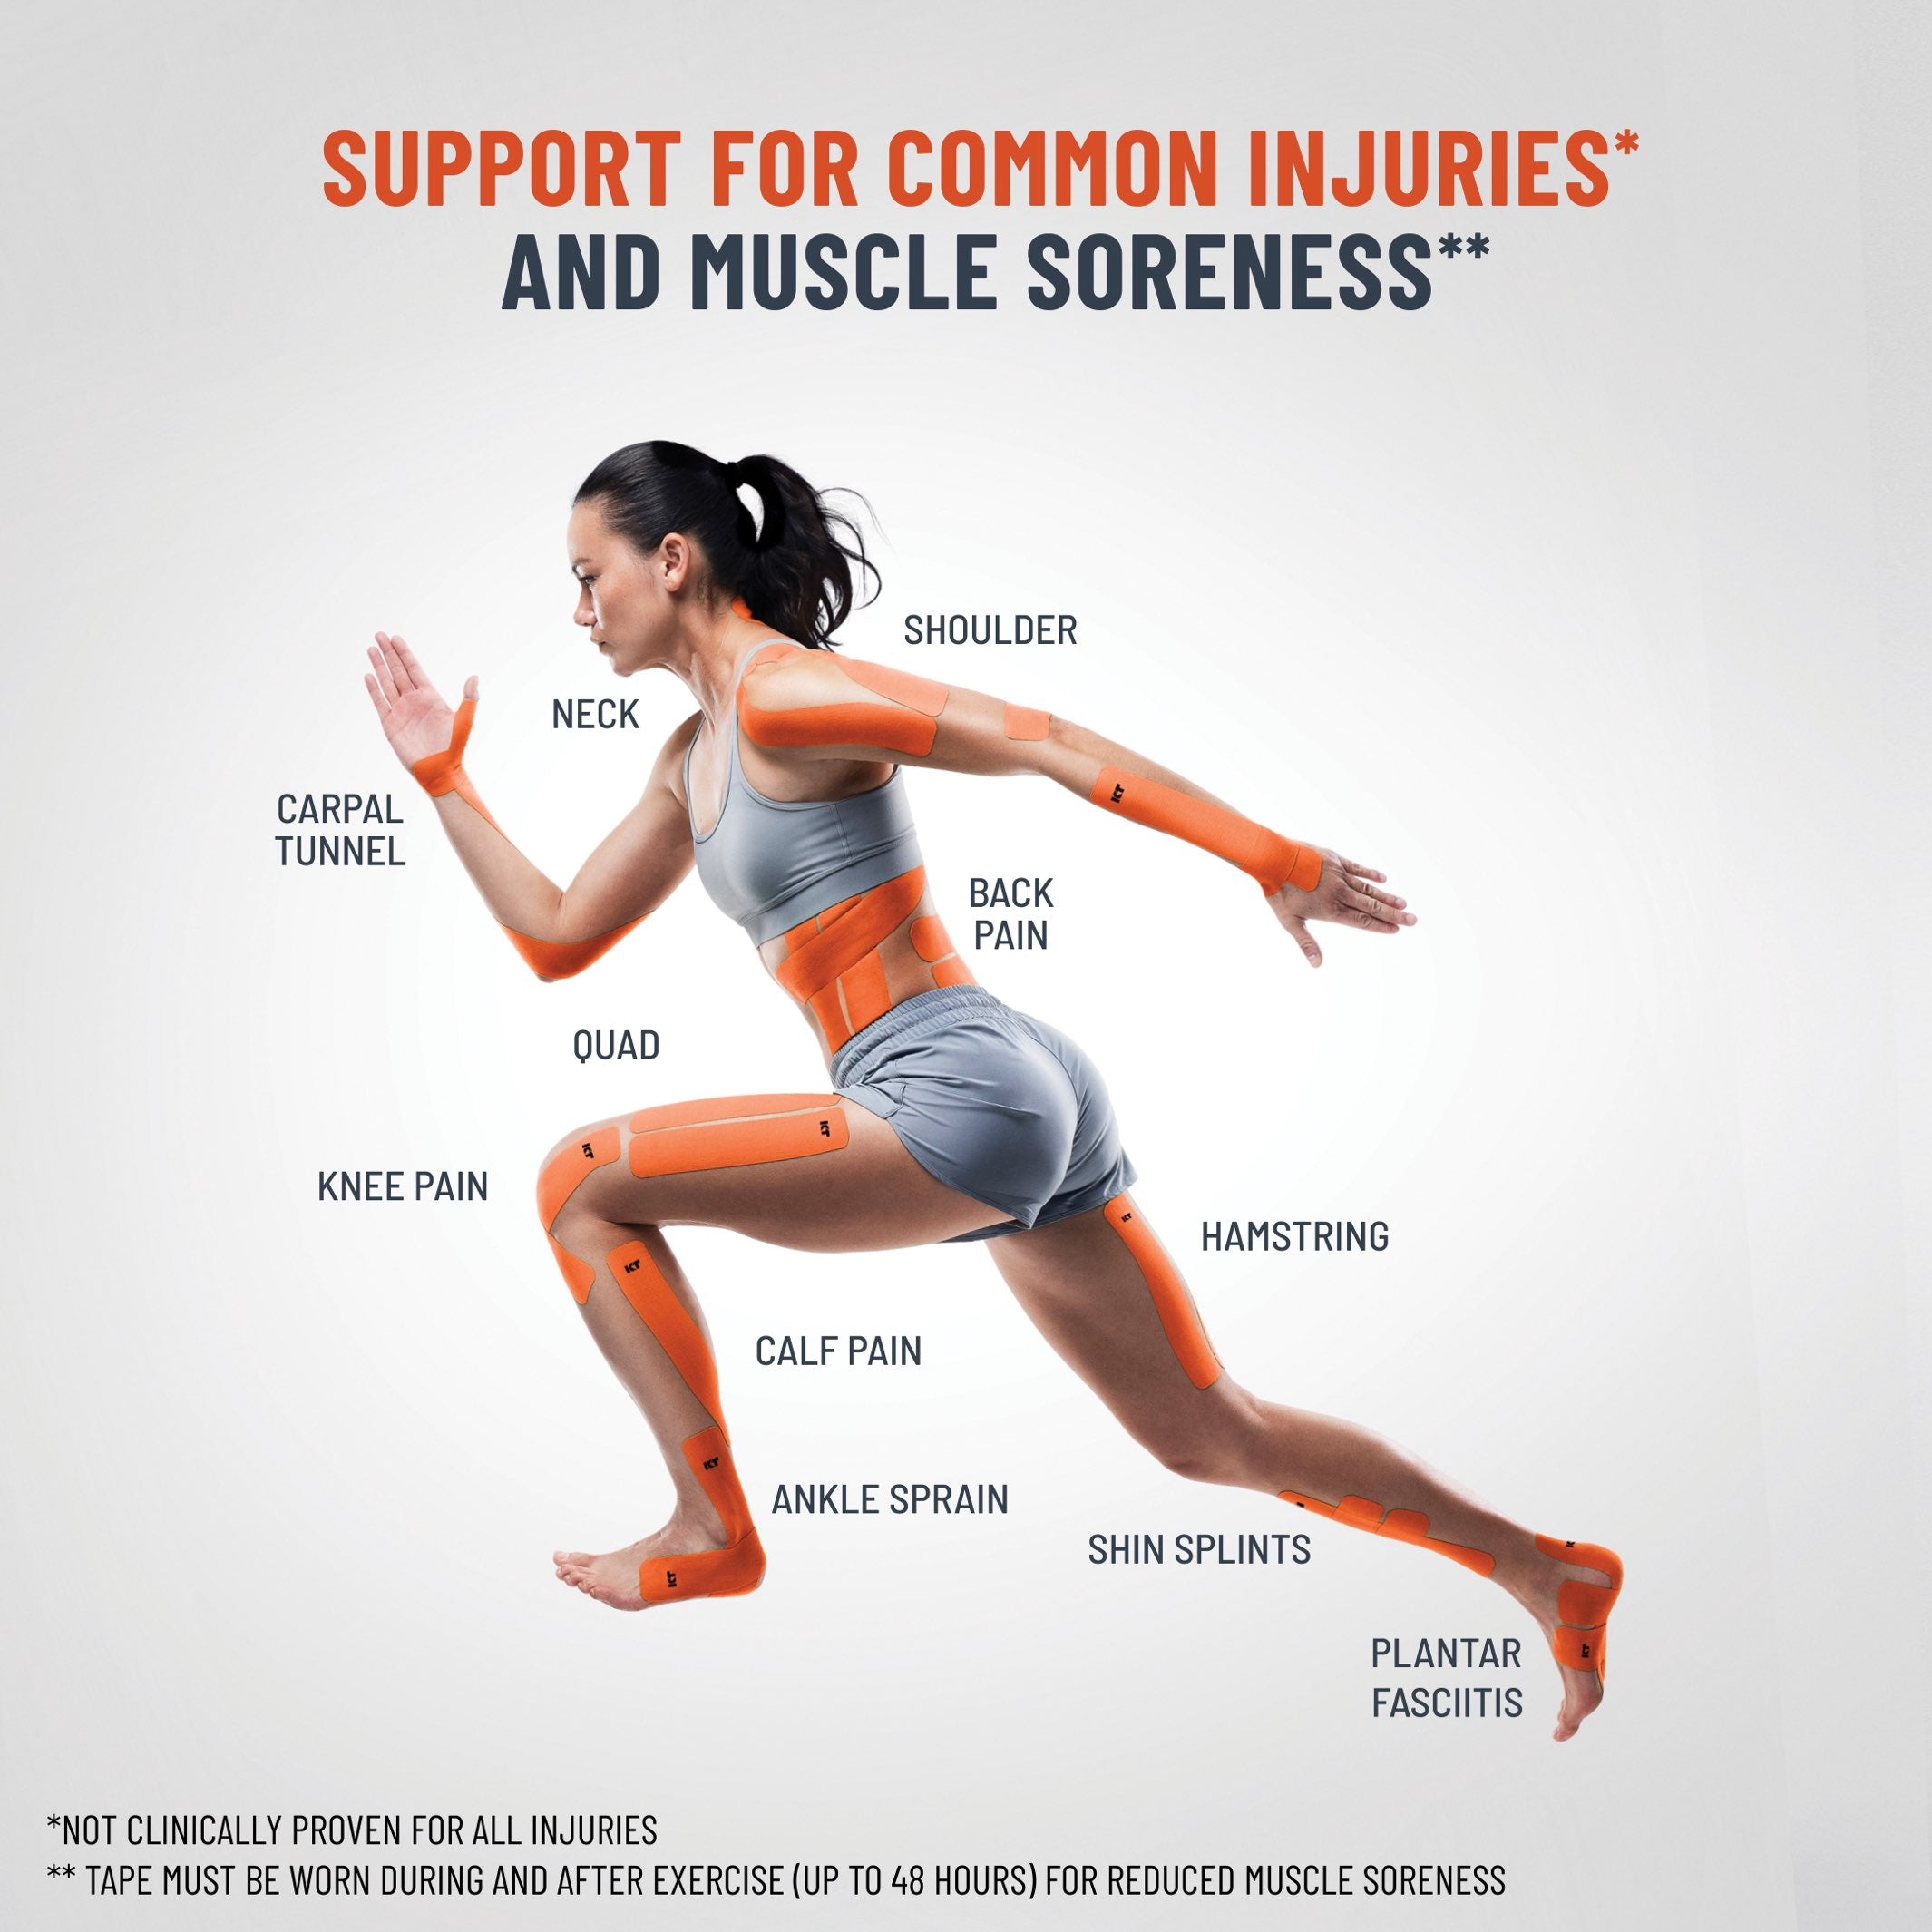 Support for common injuries and muscle soreness